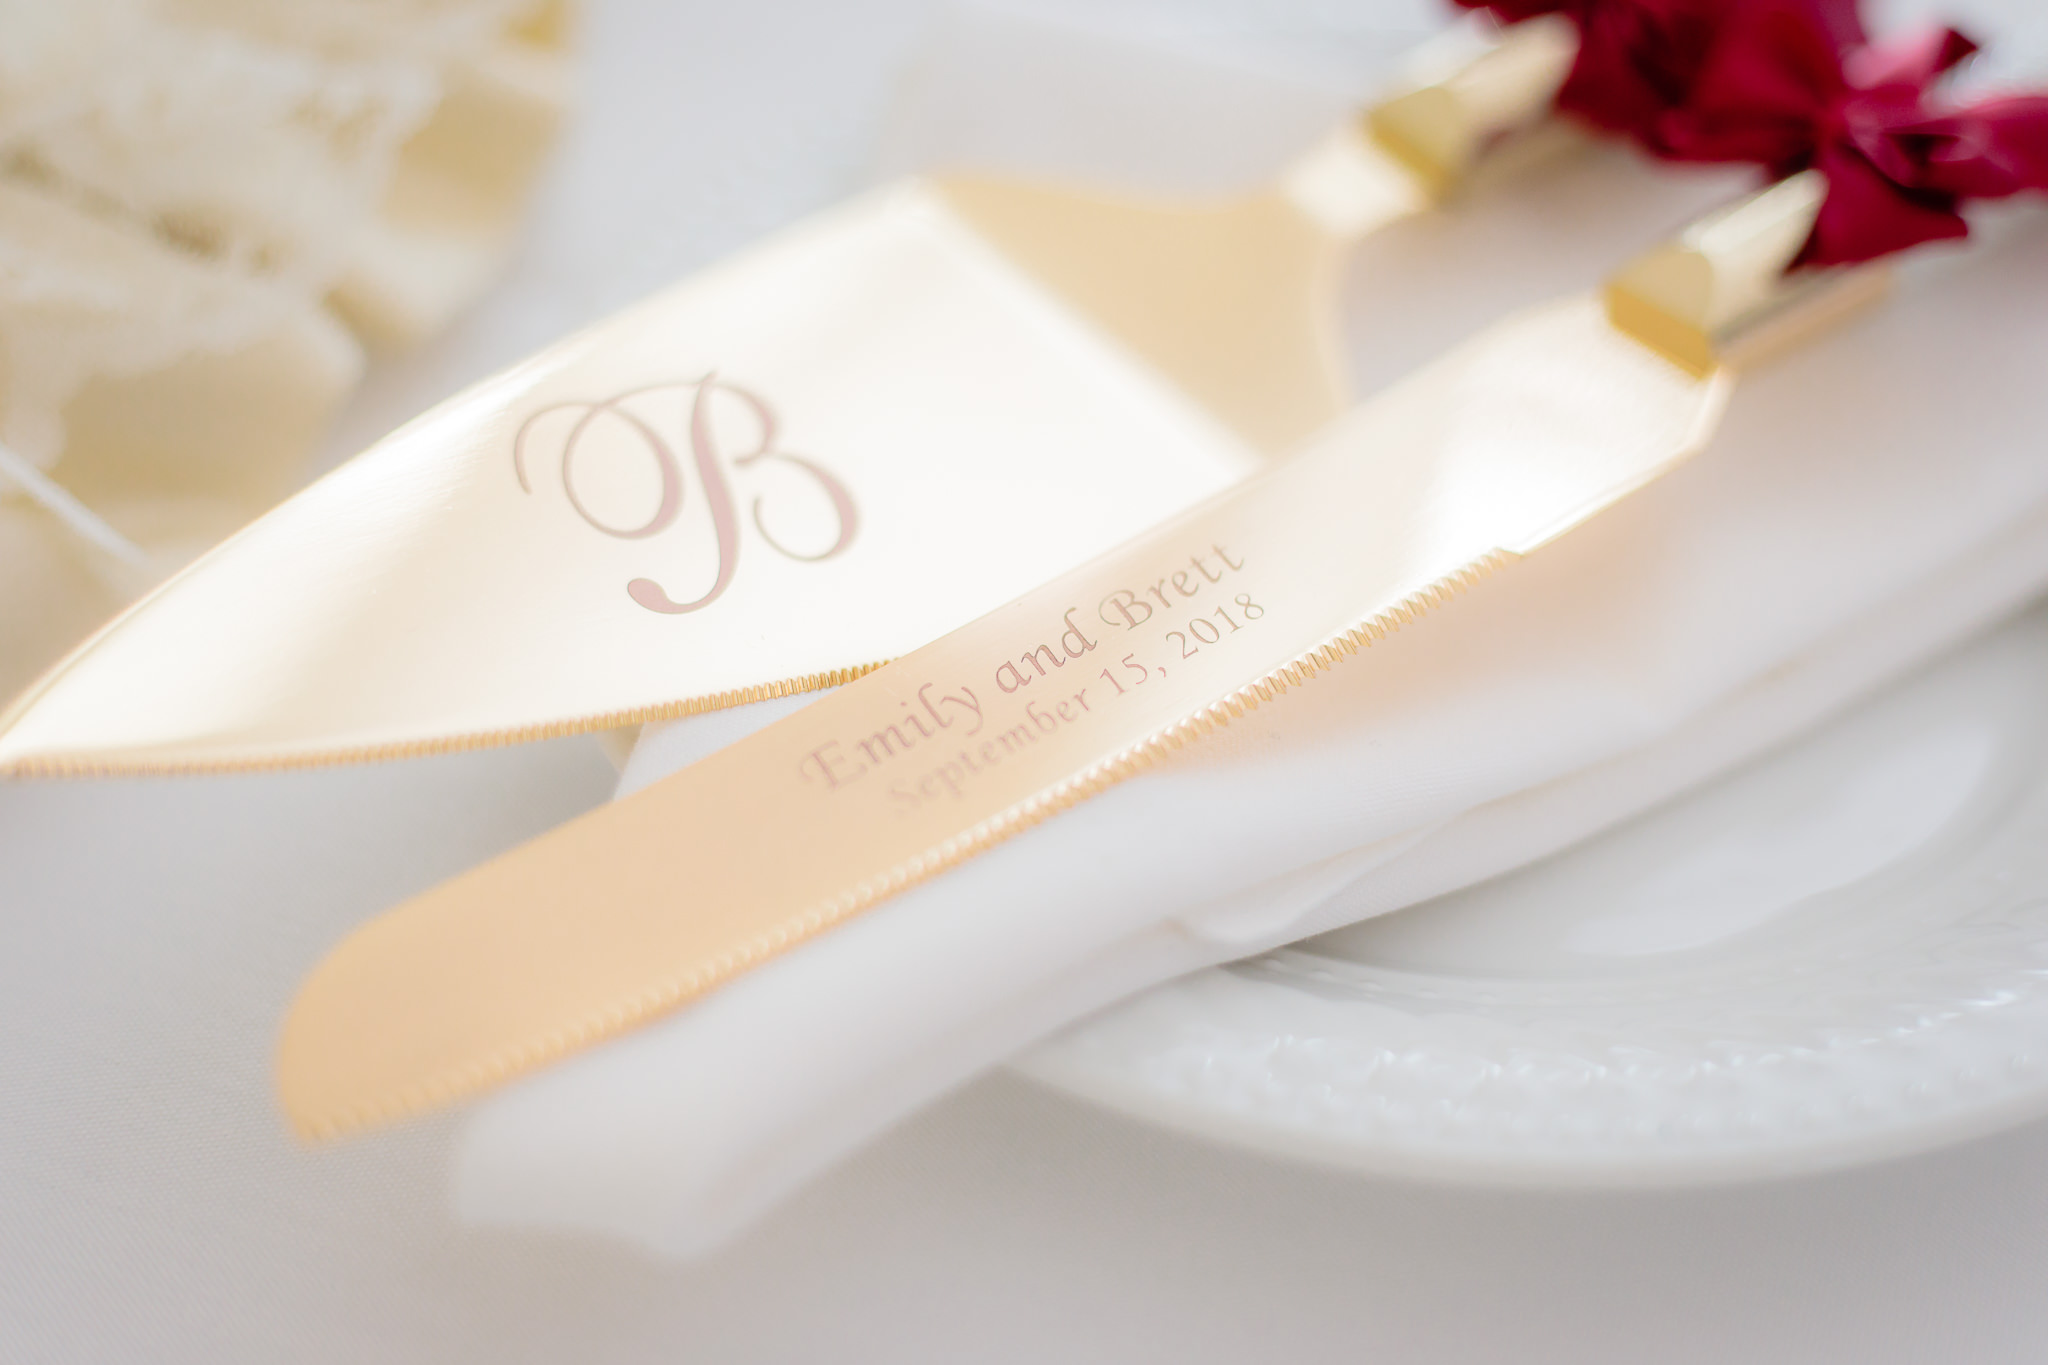 Engraved cake knife and server at a Greystone Fields wedding